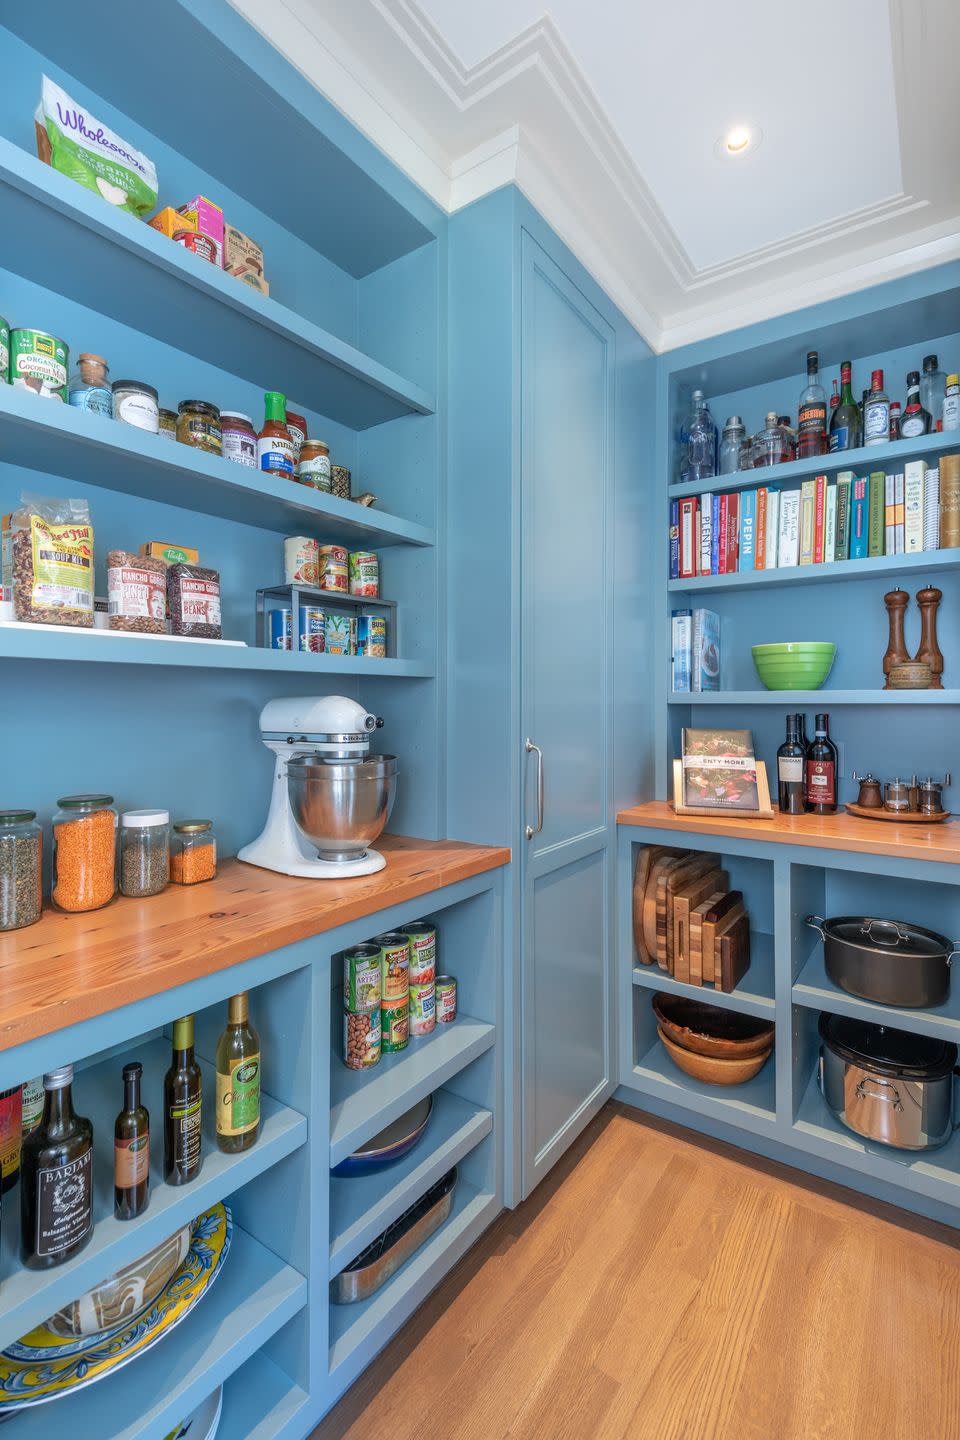 pantry organization ideas, bright blue painted walls in the pantry with wood countertops